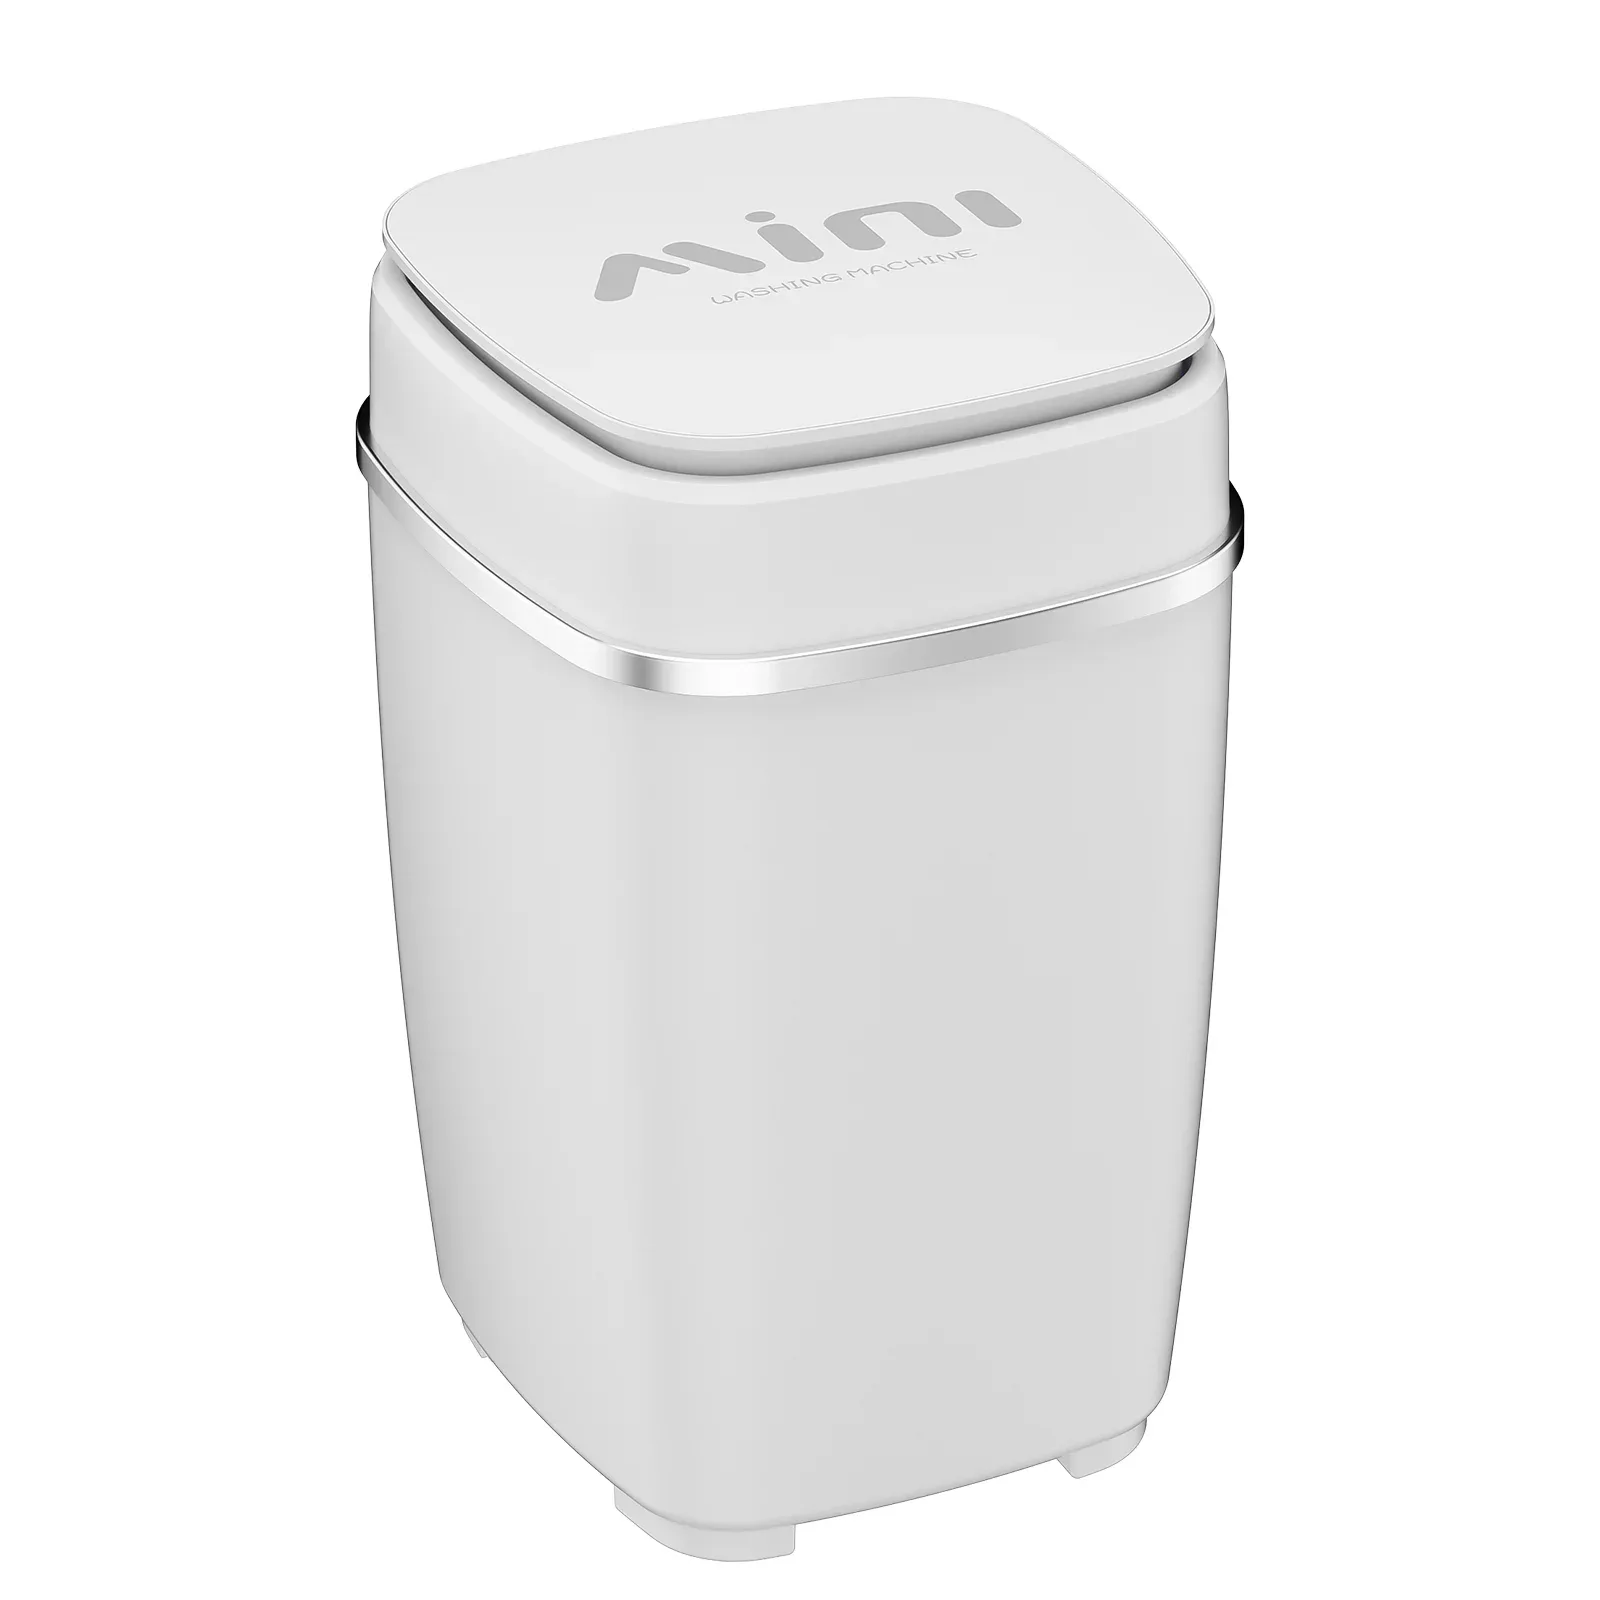 Best Portable Washing Machines & Compact Washers For Sale